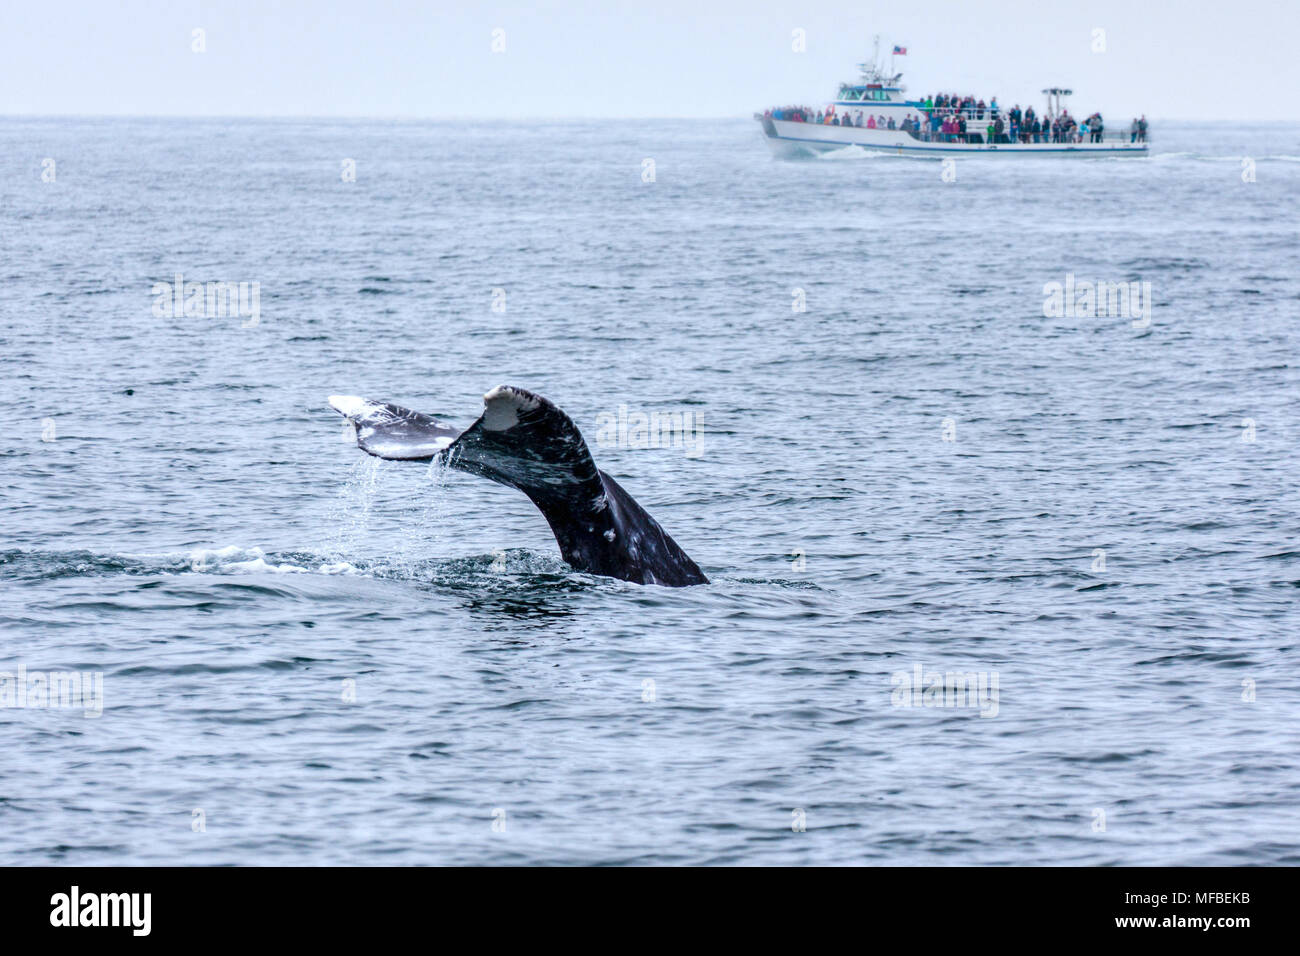 The tail of a gray whale emerged out of the water as tourists watched from a boat in the Pacific Ocean just off the coast of Southern California. Stock Photo